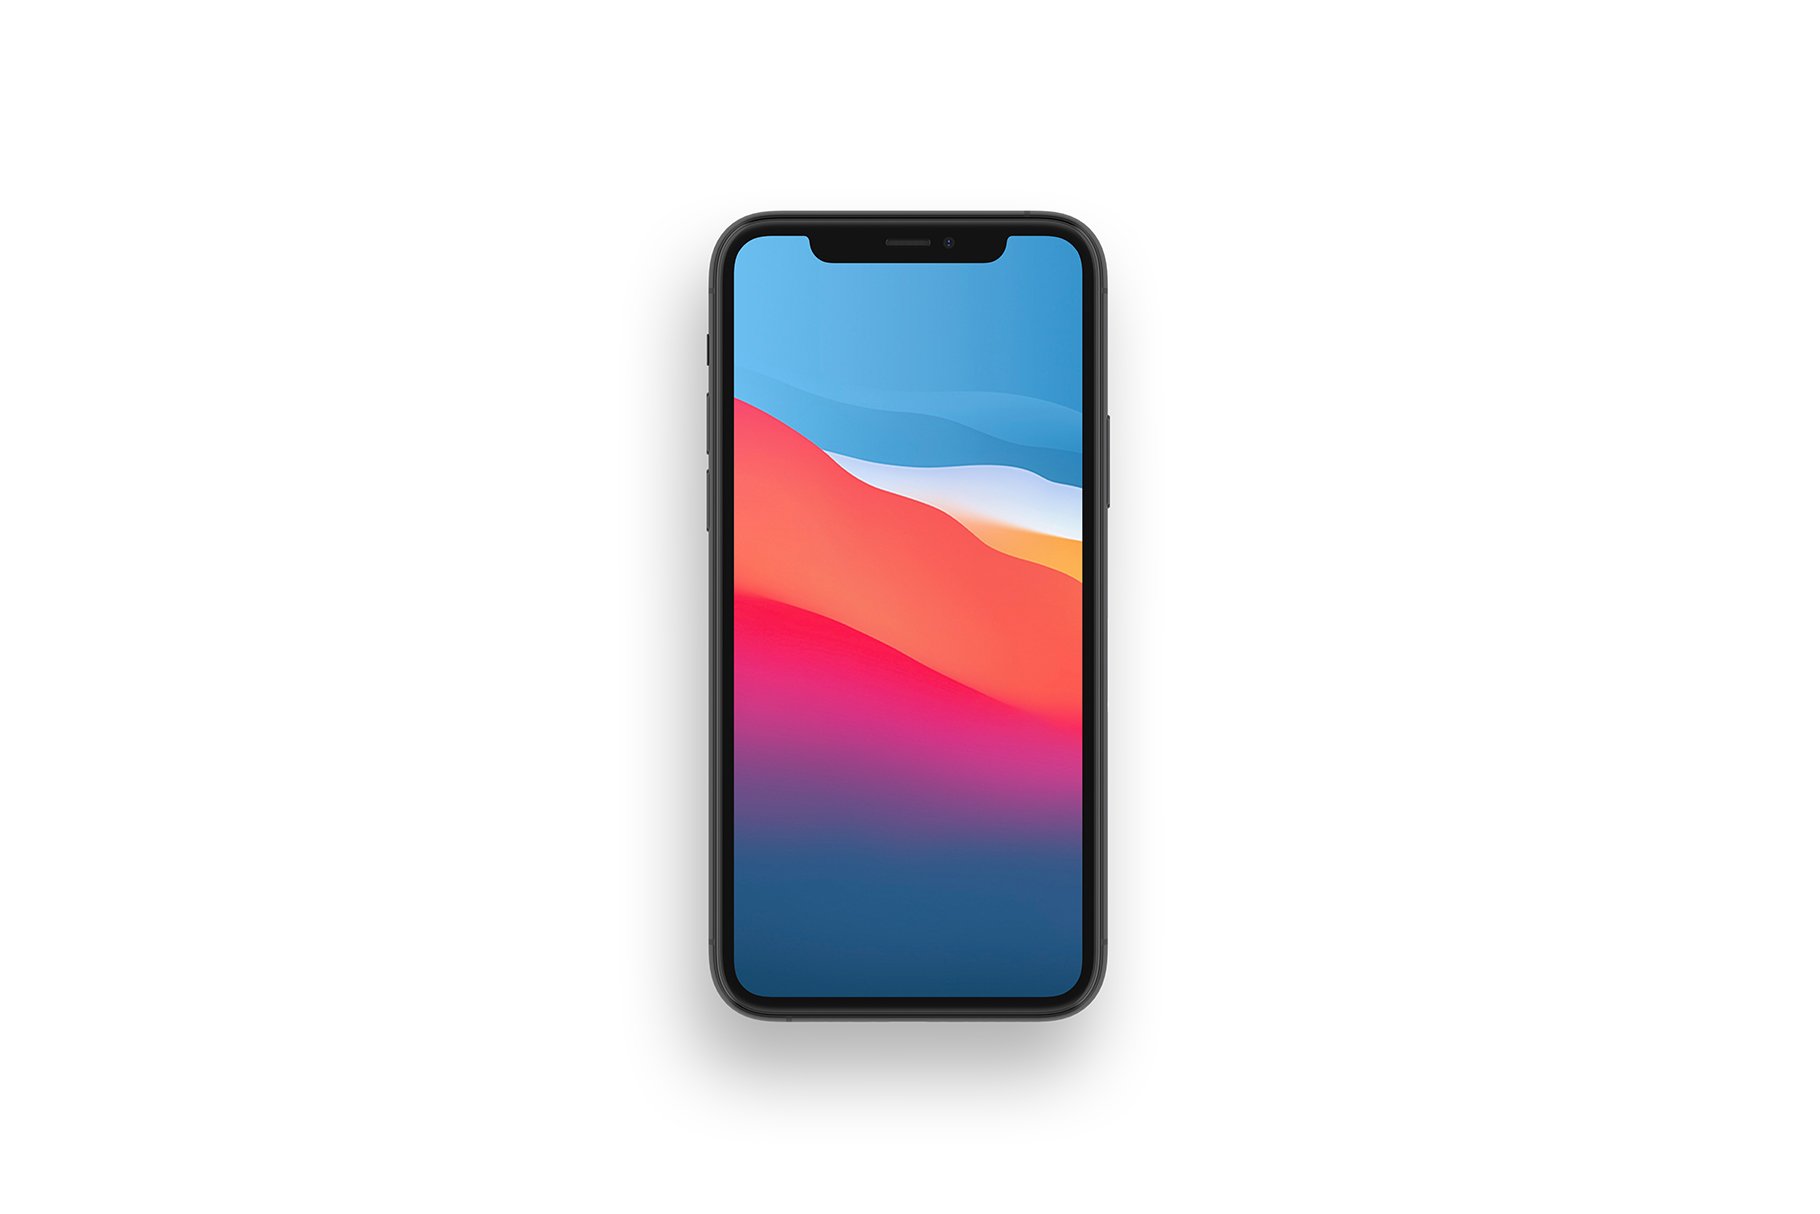 iPhone 11 Pro Mockup Pack cover image.